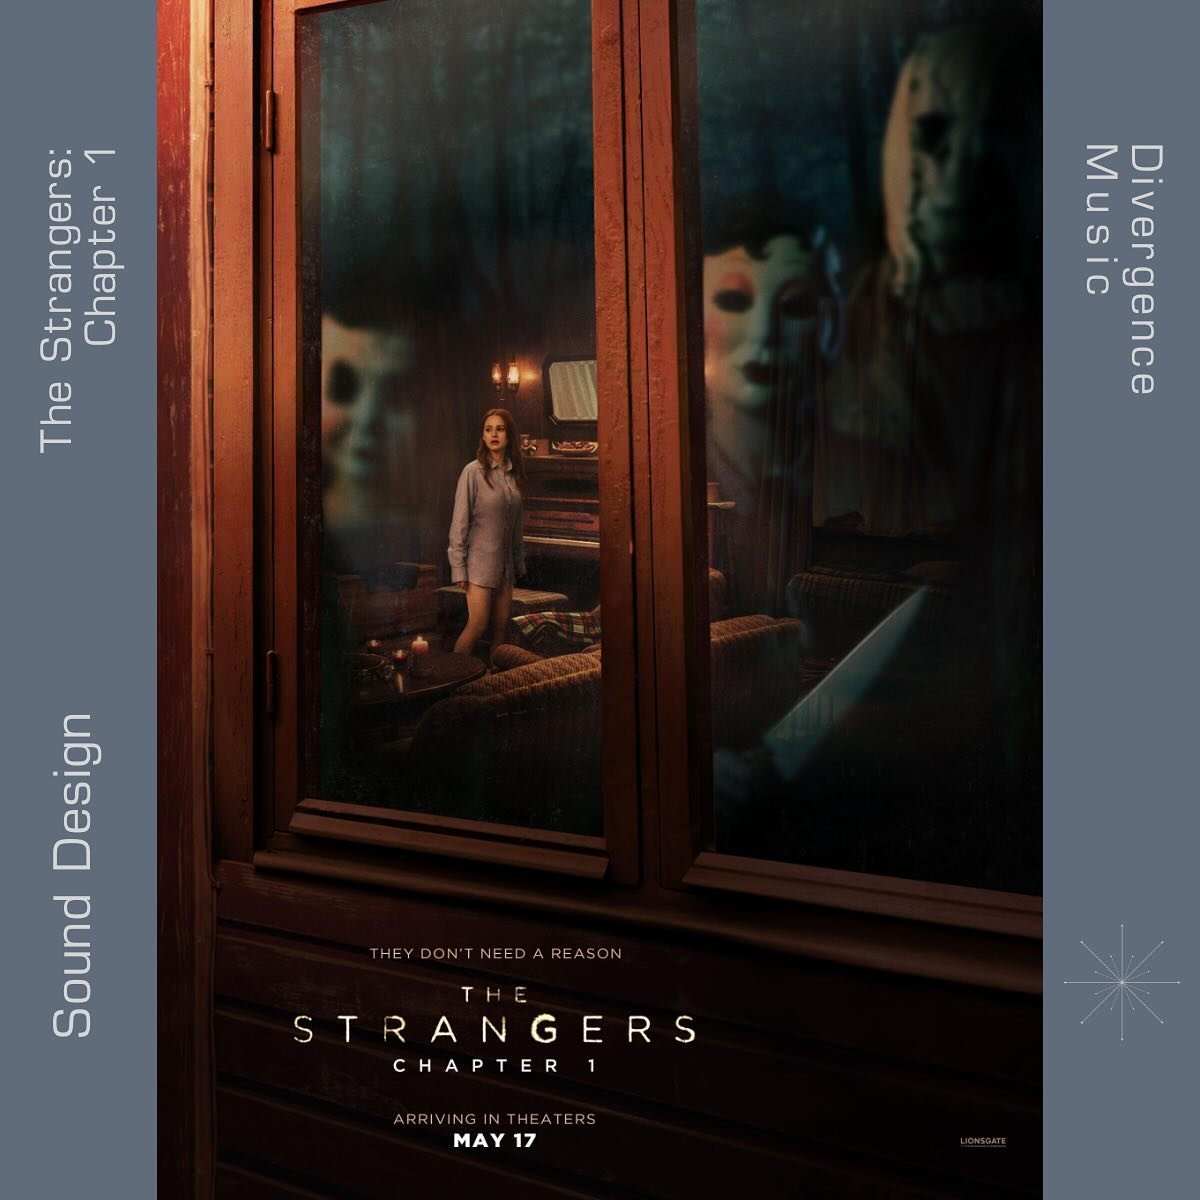 Check out some of our creepiest sound design from our Horror Tools series in the great new trailer for #TheStrangersMovie Chapter 1.

Always a pleasure to work with our friends at @lionsgate thanks for having us!